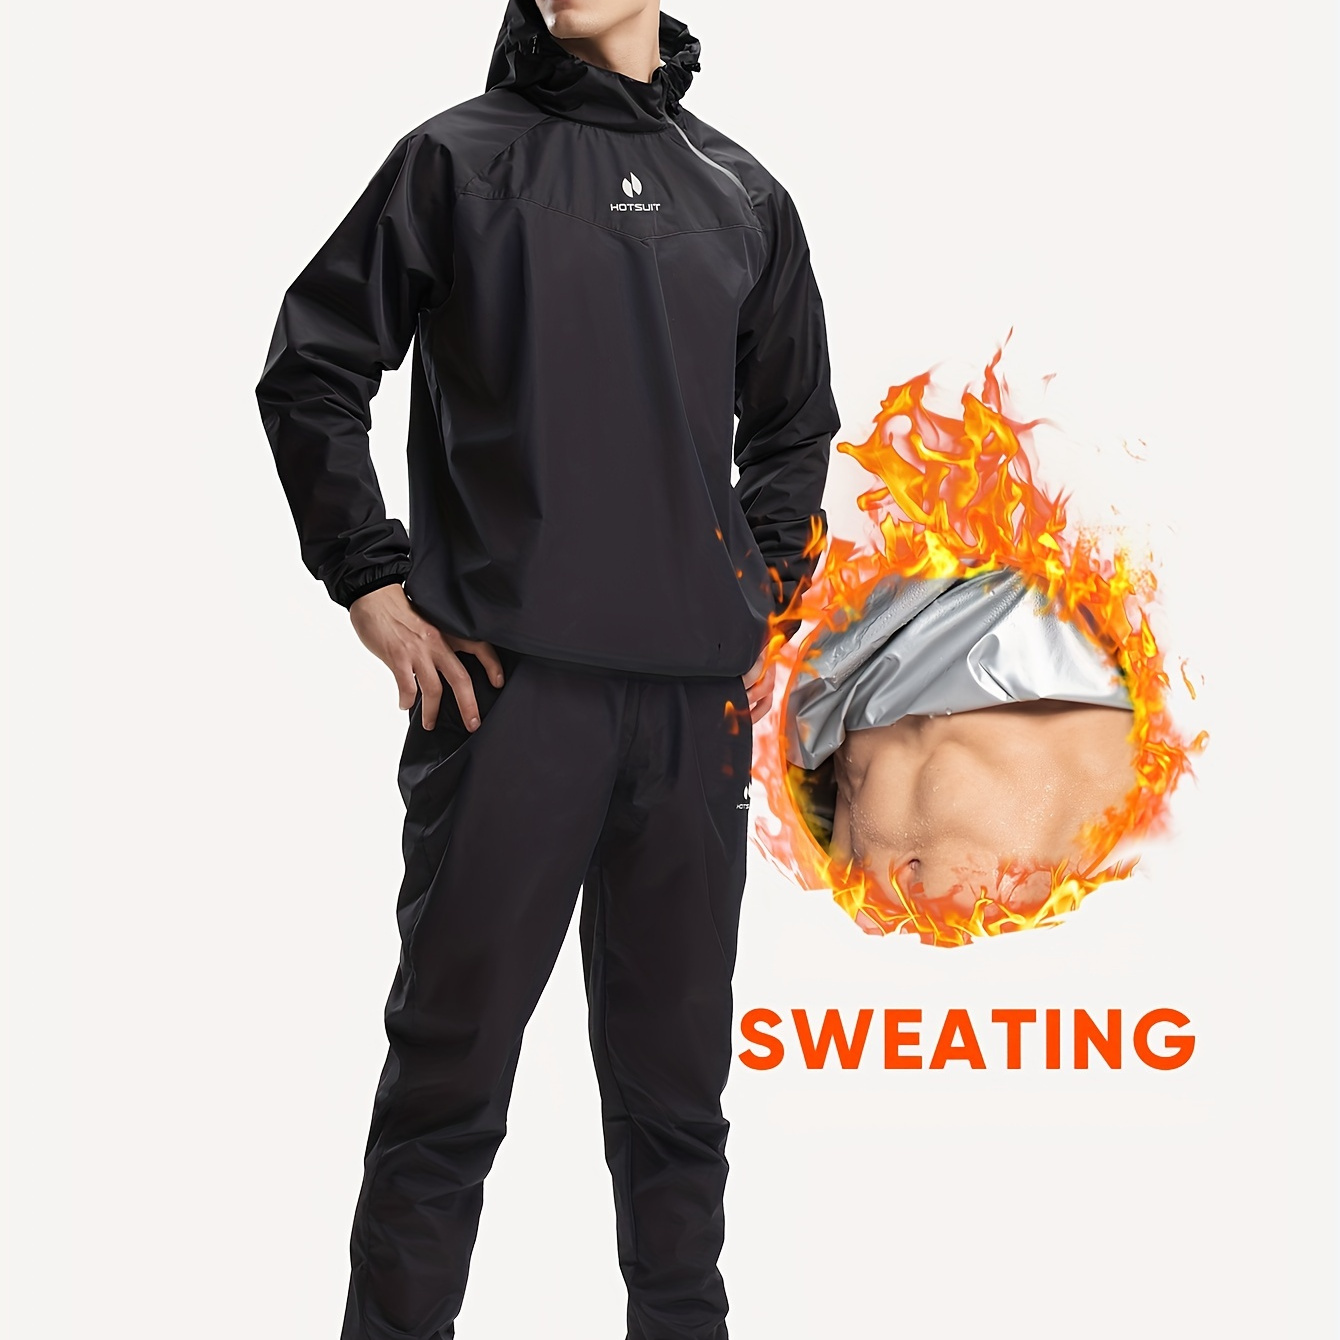 

Hotsuit Sauna Suit For Men Big And Tall Quarter Zipper Hooded Contrasting Colors Sweat Jacket Pants Workout Sweat Suits Gym Wear Sport